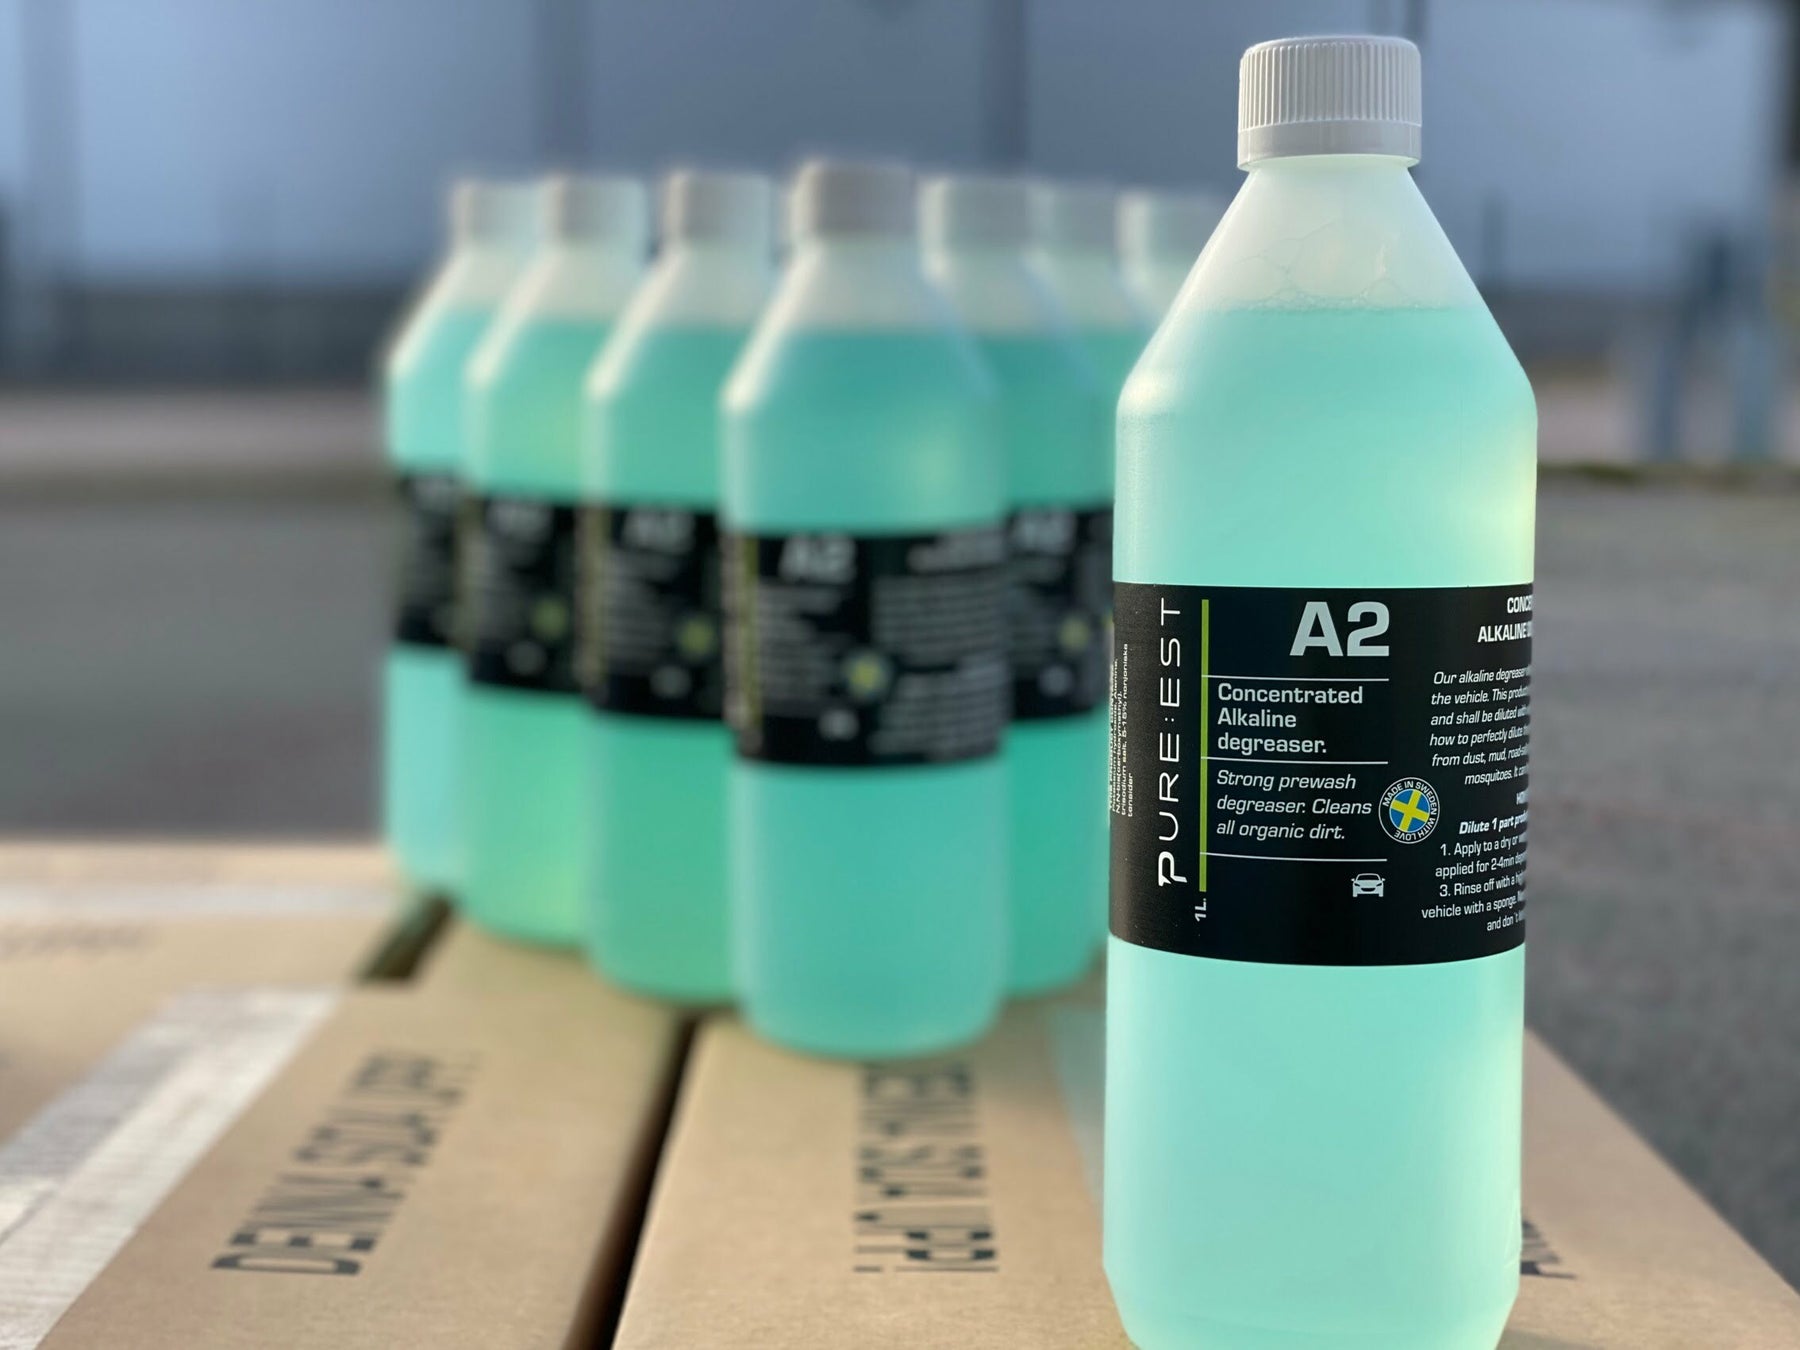 A2 Alkaline Degreaser 1 liter - concentrated